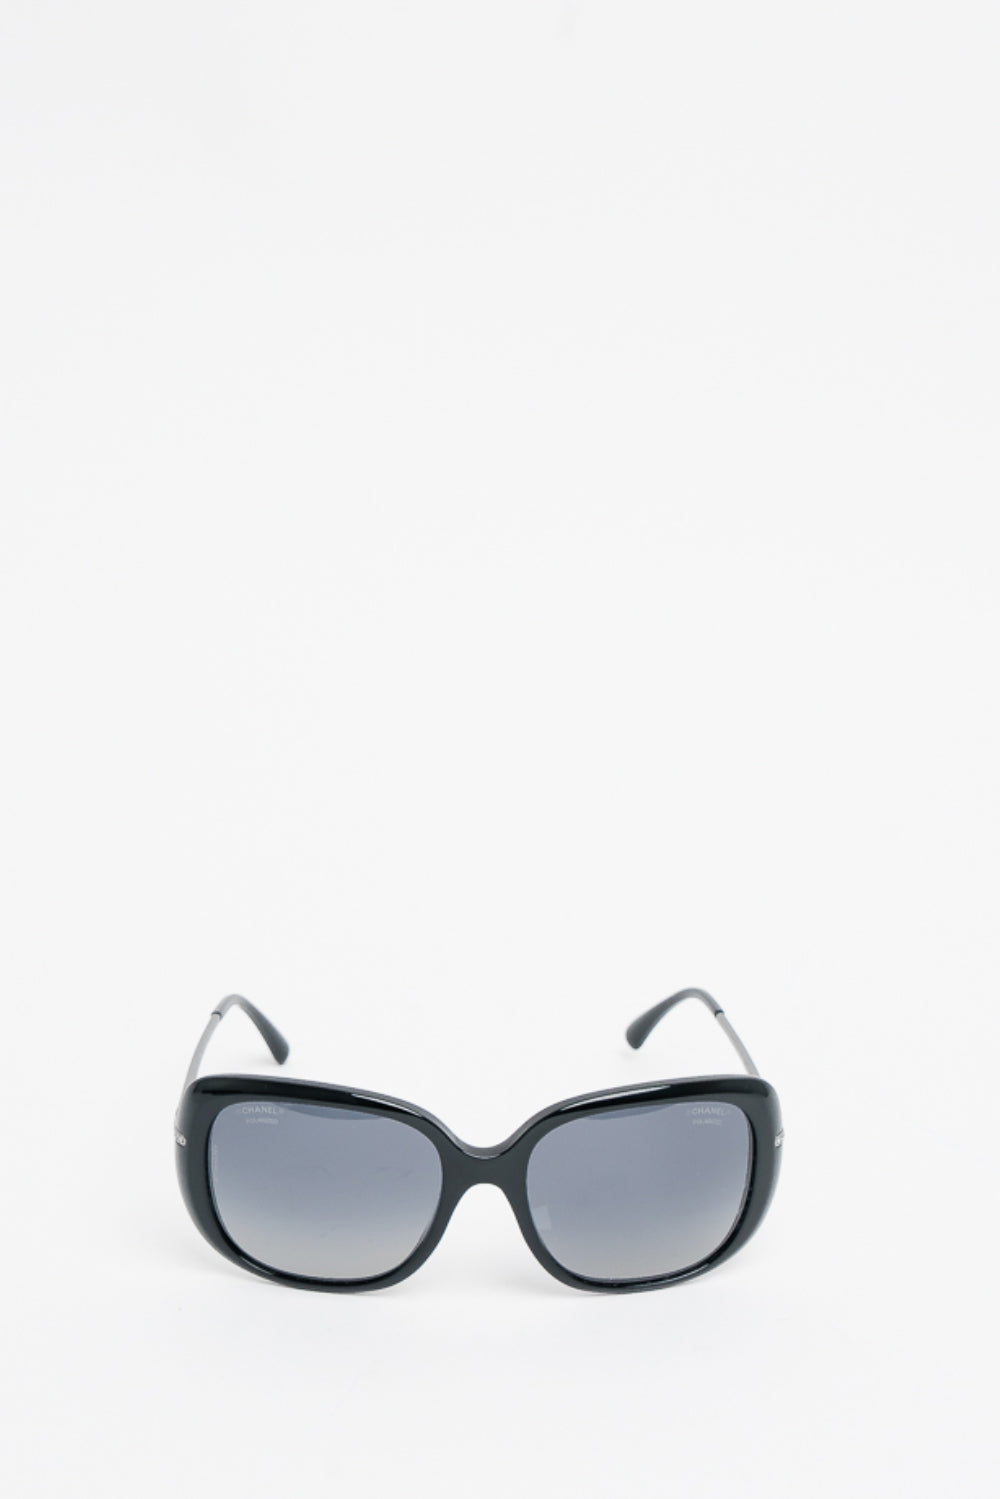 Chanel Blue Square Sunglasses With Diamond Details – Once More Luxury